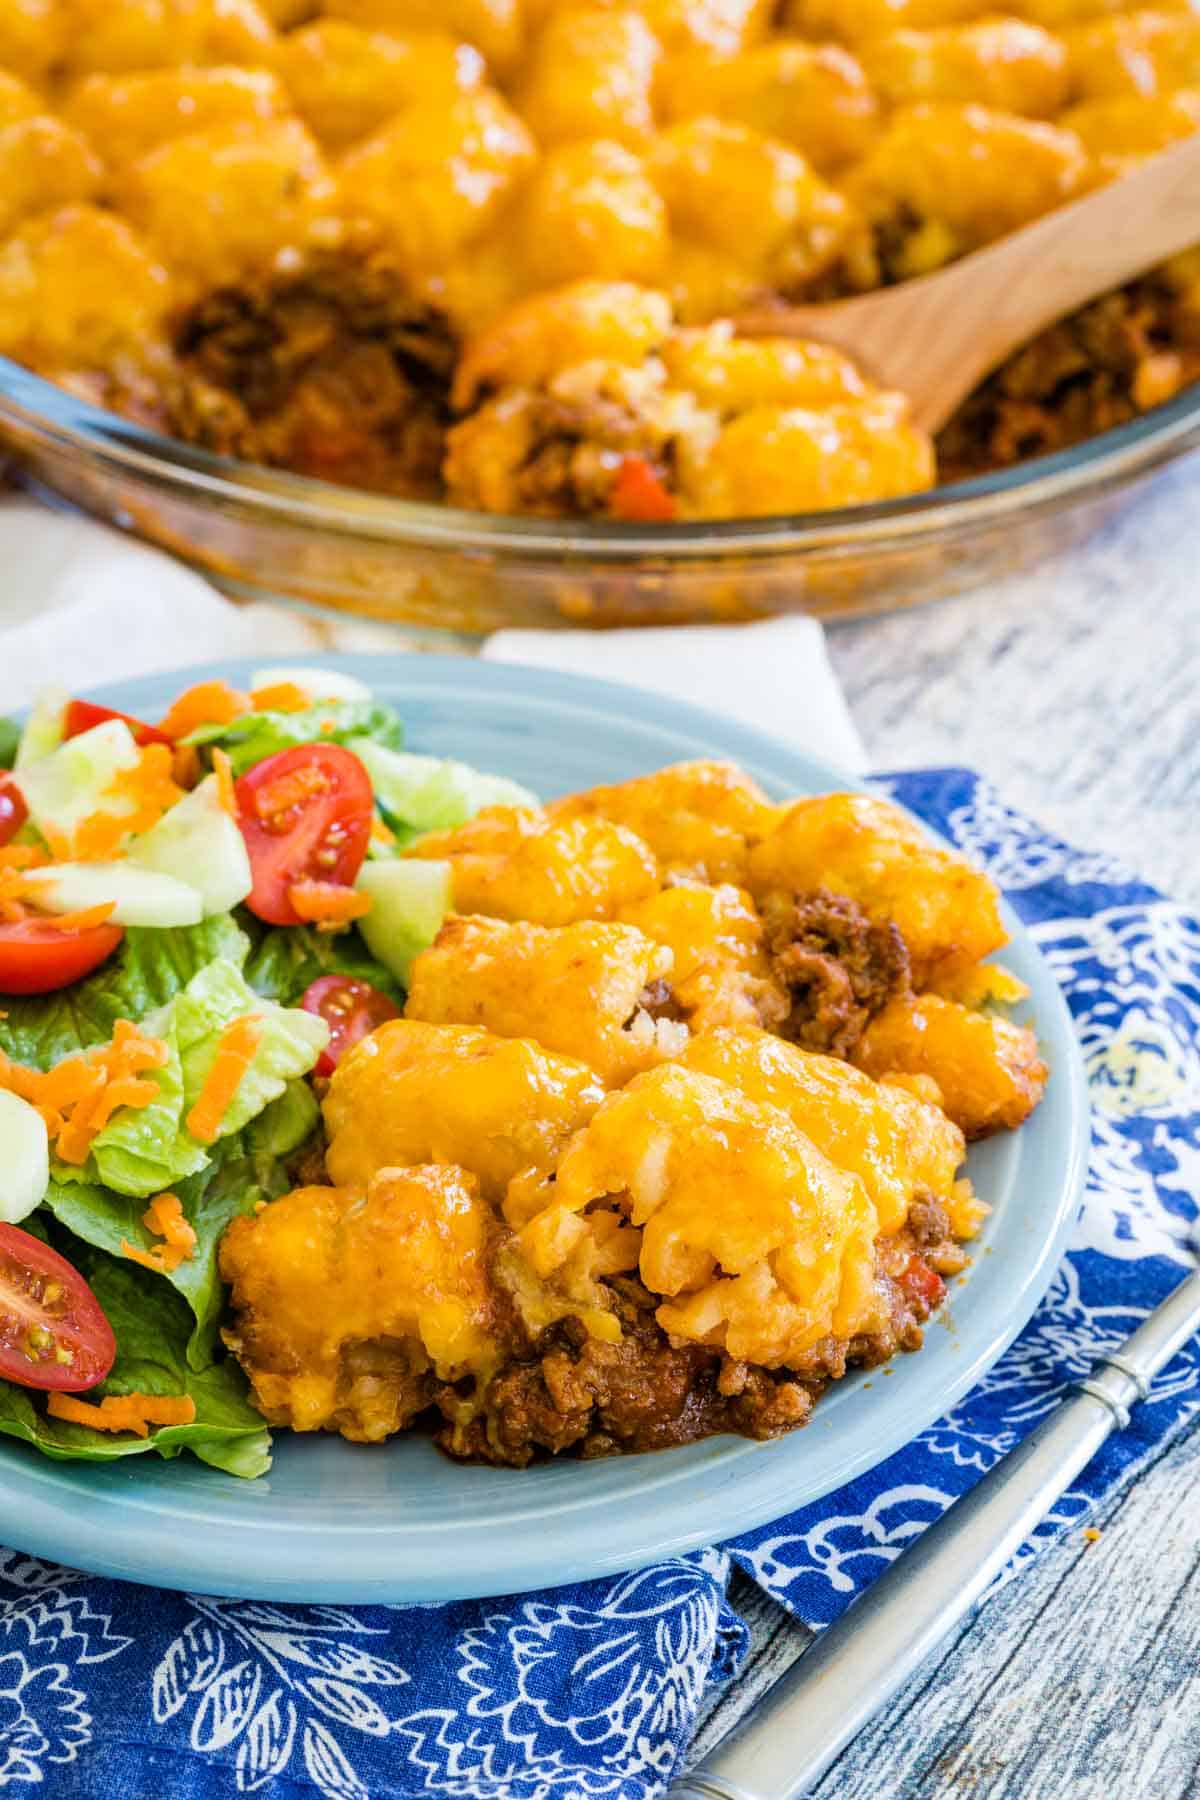 A serving of sloppy joe tater tot casserole on a plate next to a green salad, with the rest of the casserole in the background.